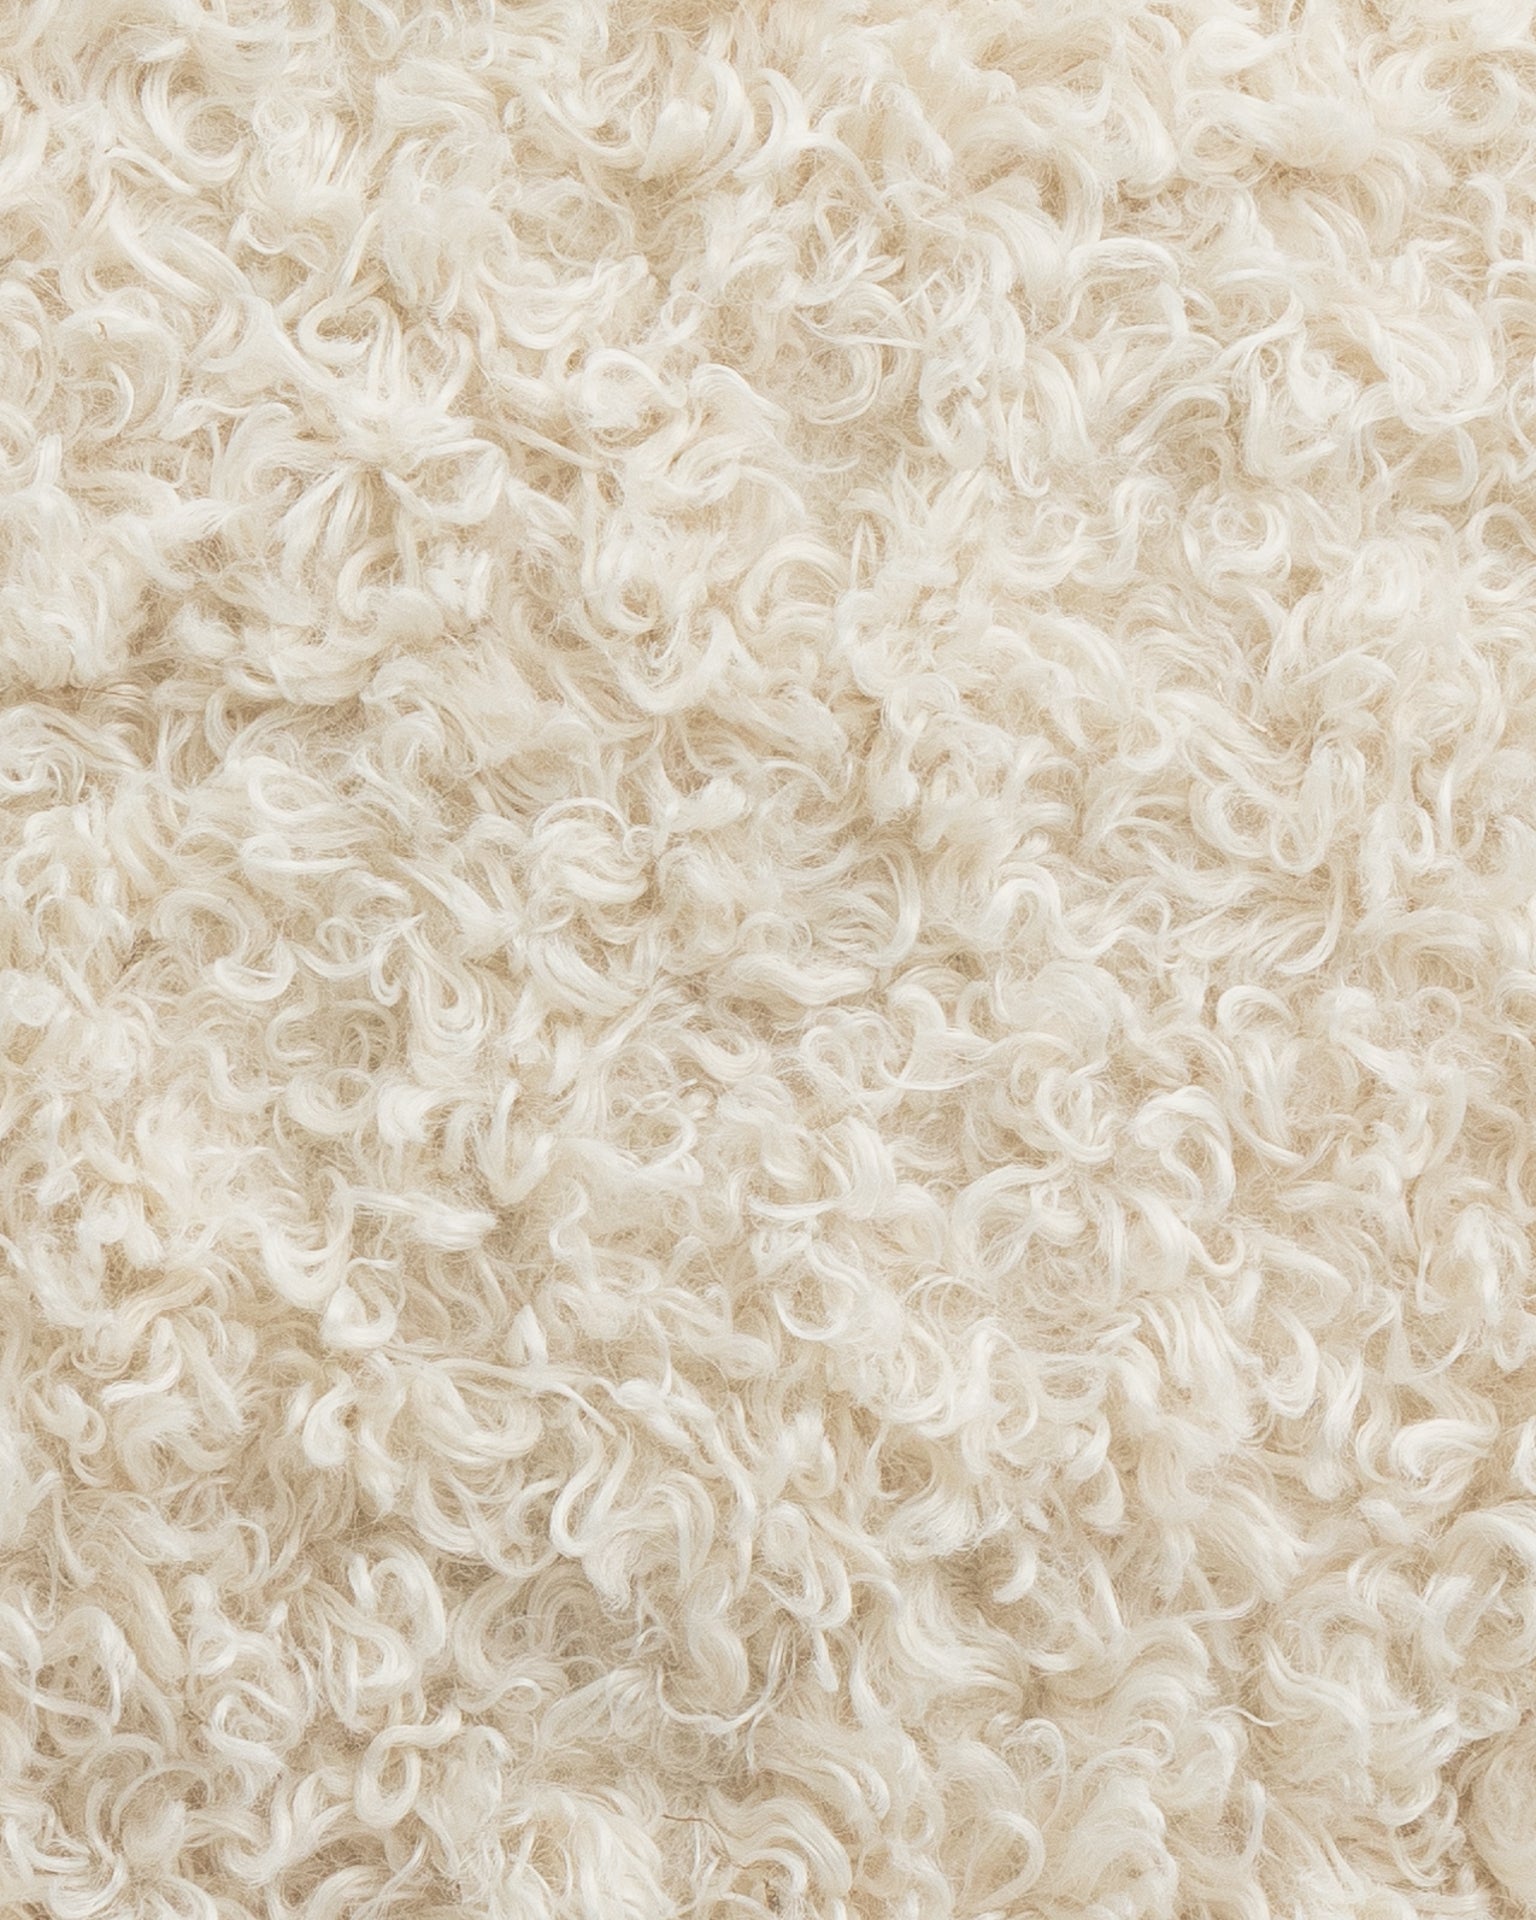 Close-up of a fluffy, curly Gabby sheepskin rug with an off-white color, ideal for a Scottsdale Arizona bungalow, showcasing a dense and textured surface.